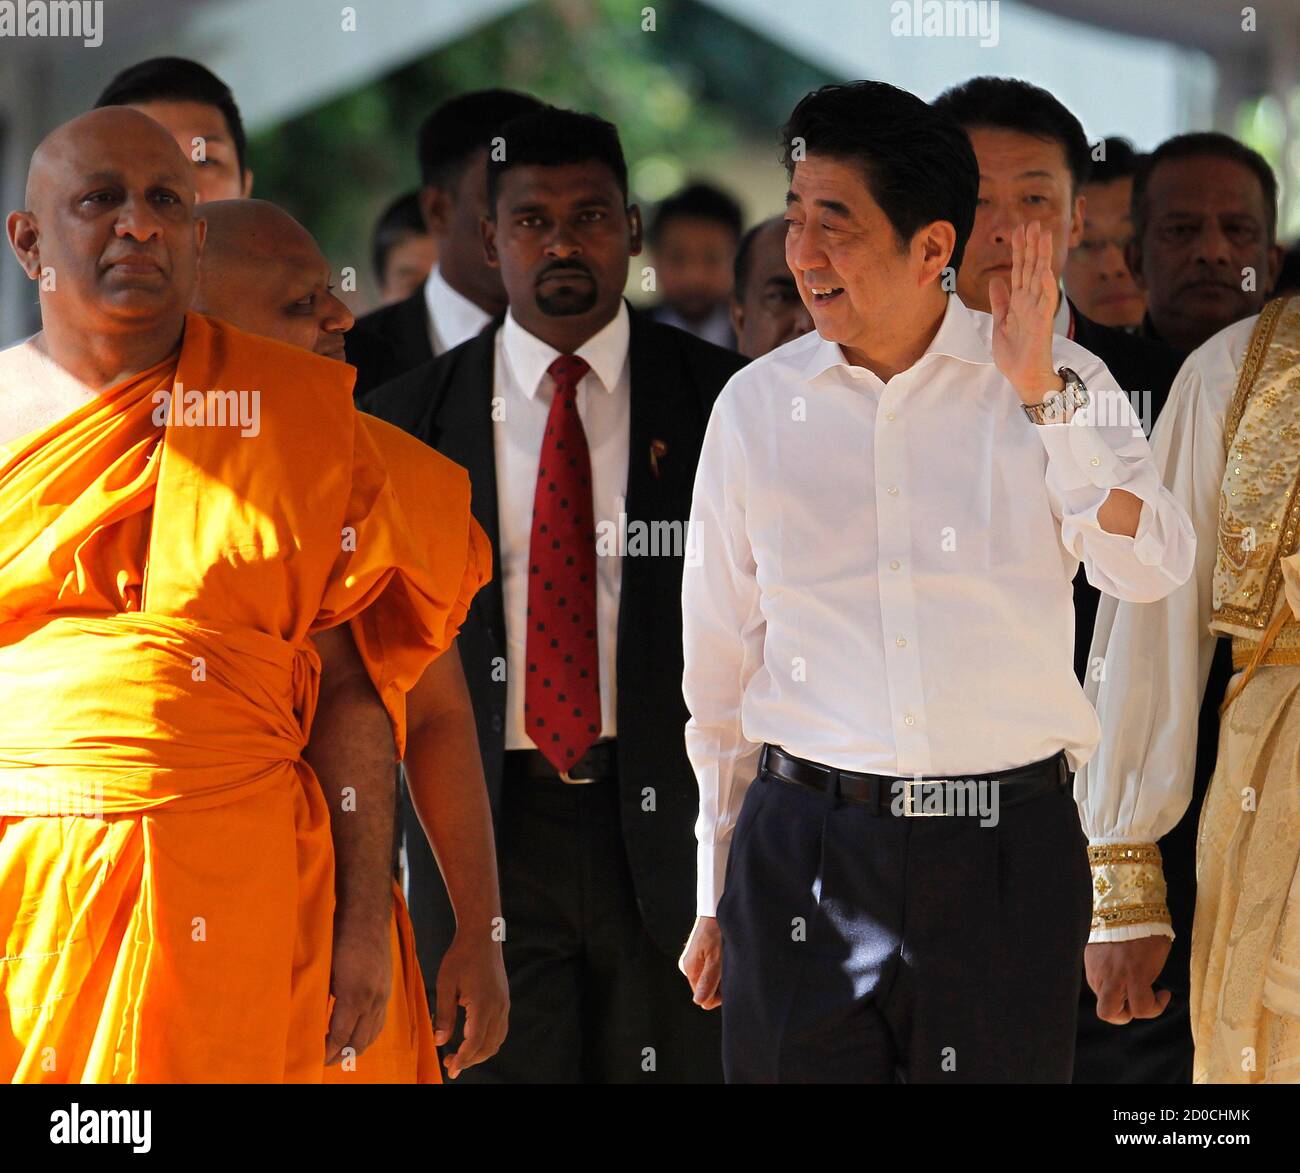 Japan's Prime Minister Shinzo Abe (R) walks as he gestures at devotees during his visit at Kelaniya Buddhist Temple in Kelaniya September 8, 2014. Abe on Sunday became the first Japanese prime minister to visit Sri Lanka in 24 years, on the second leg of a South Asian tour. REUTERS/Dinuka Liyanawatte (SRI LANKA - Tags: POLITICS RELIGION) Stock Photo